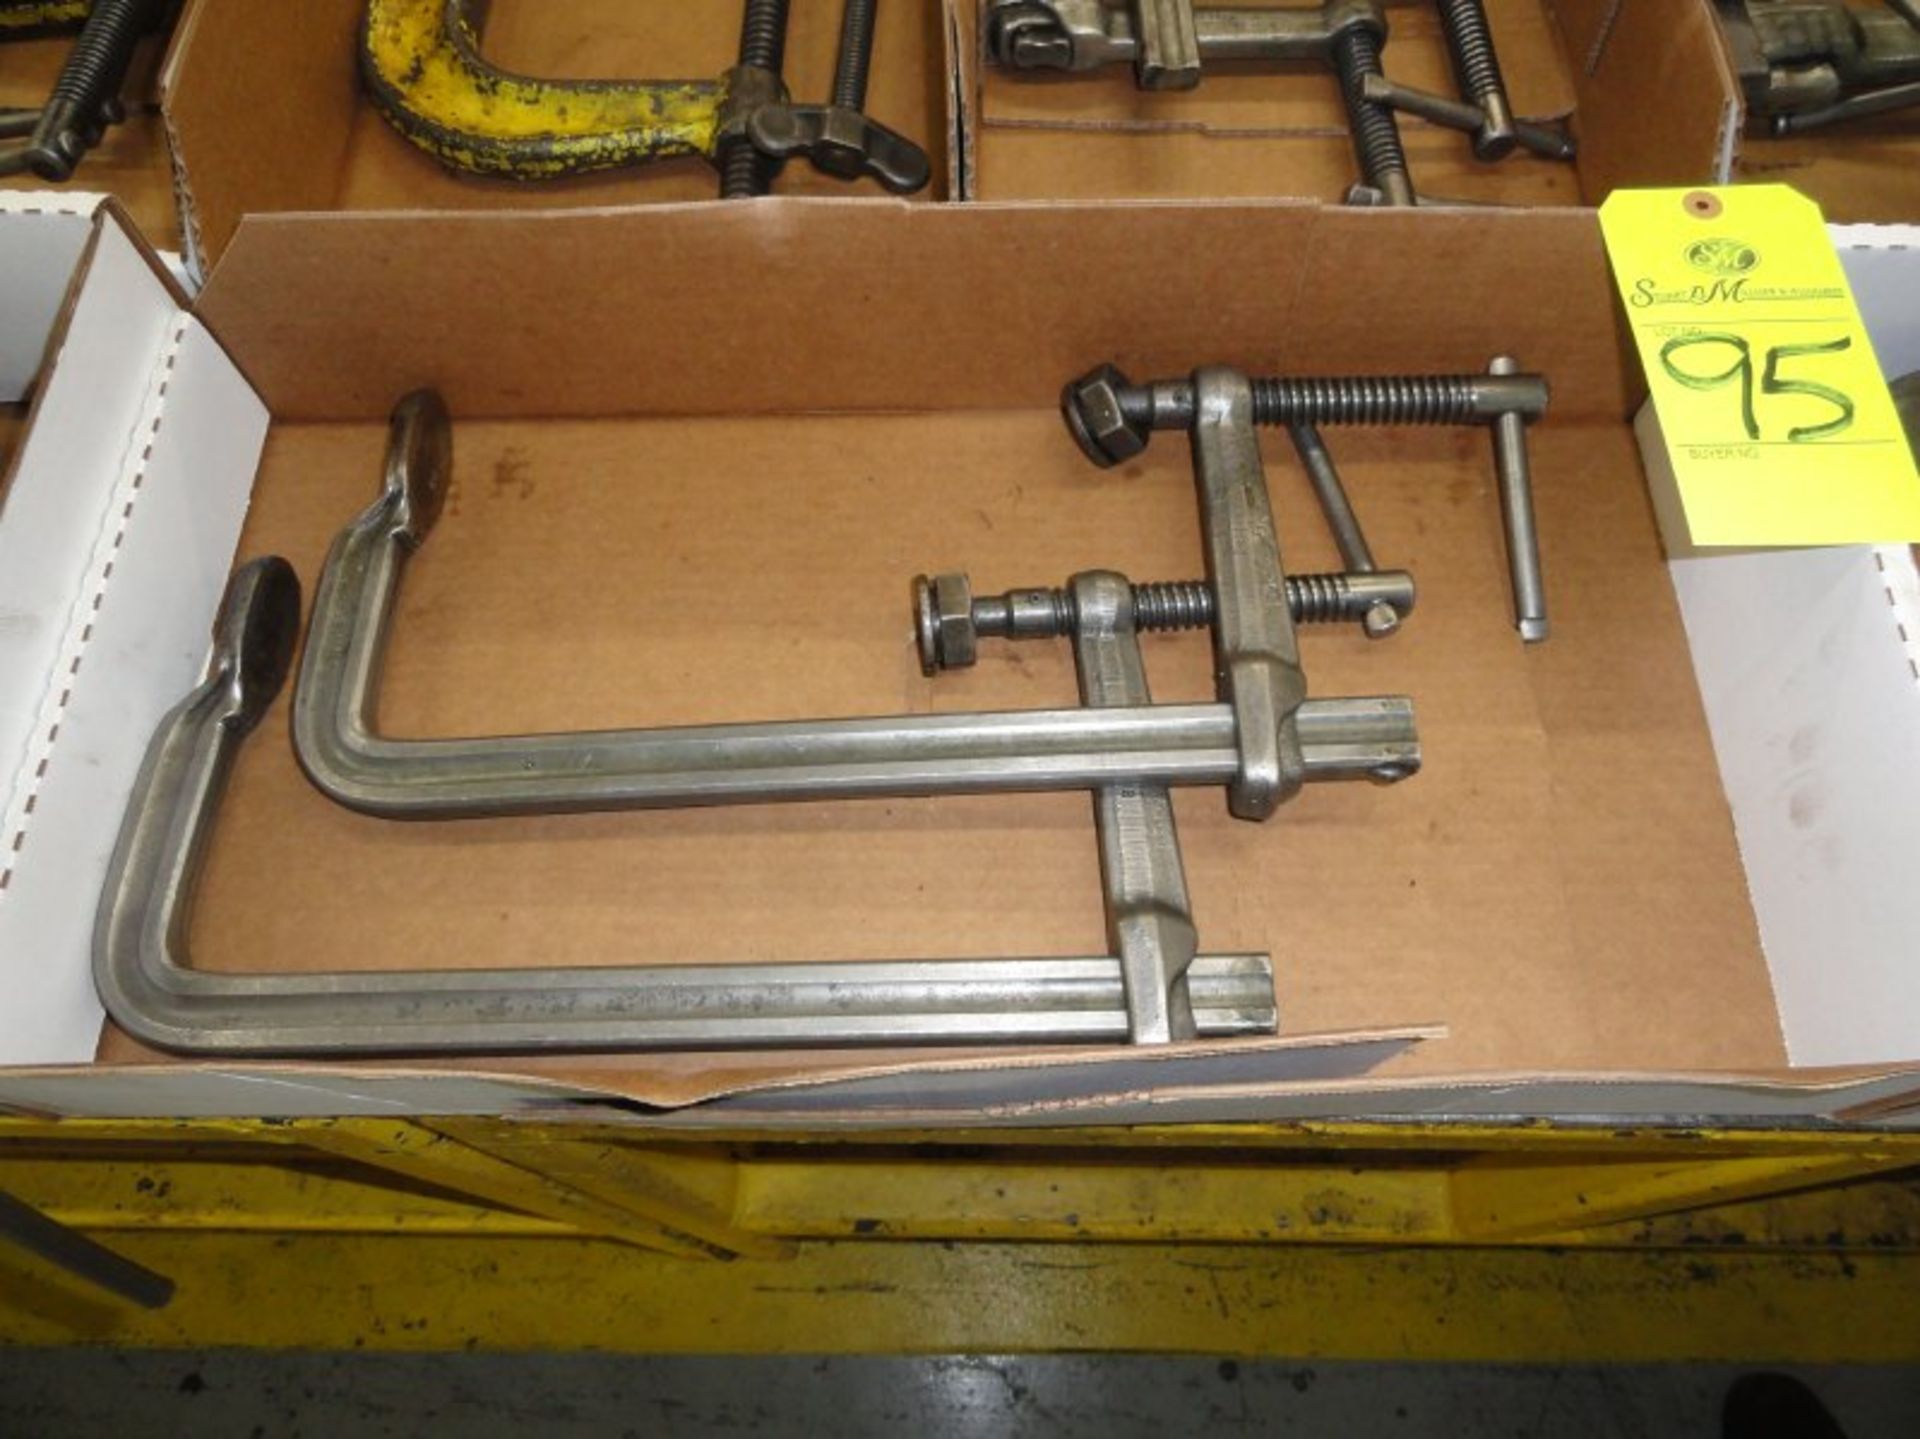 Bar clamps